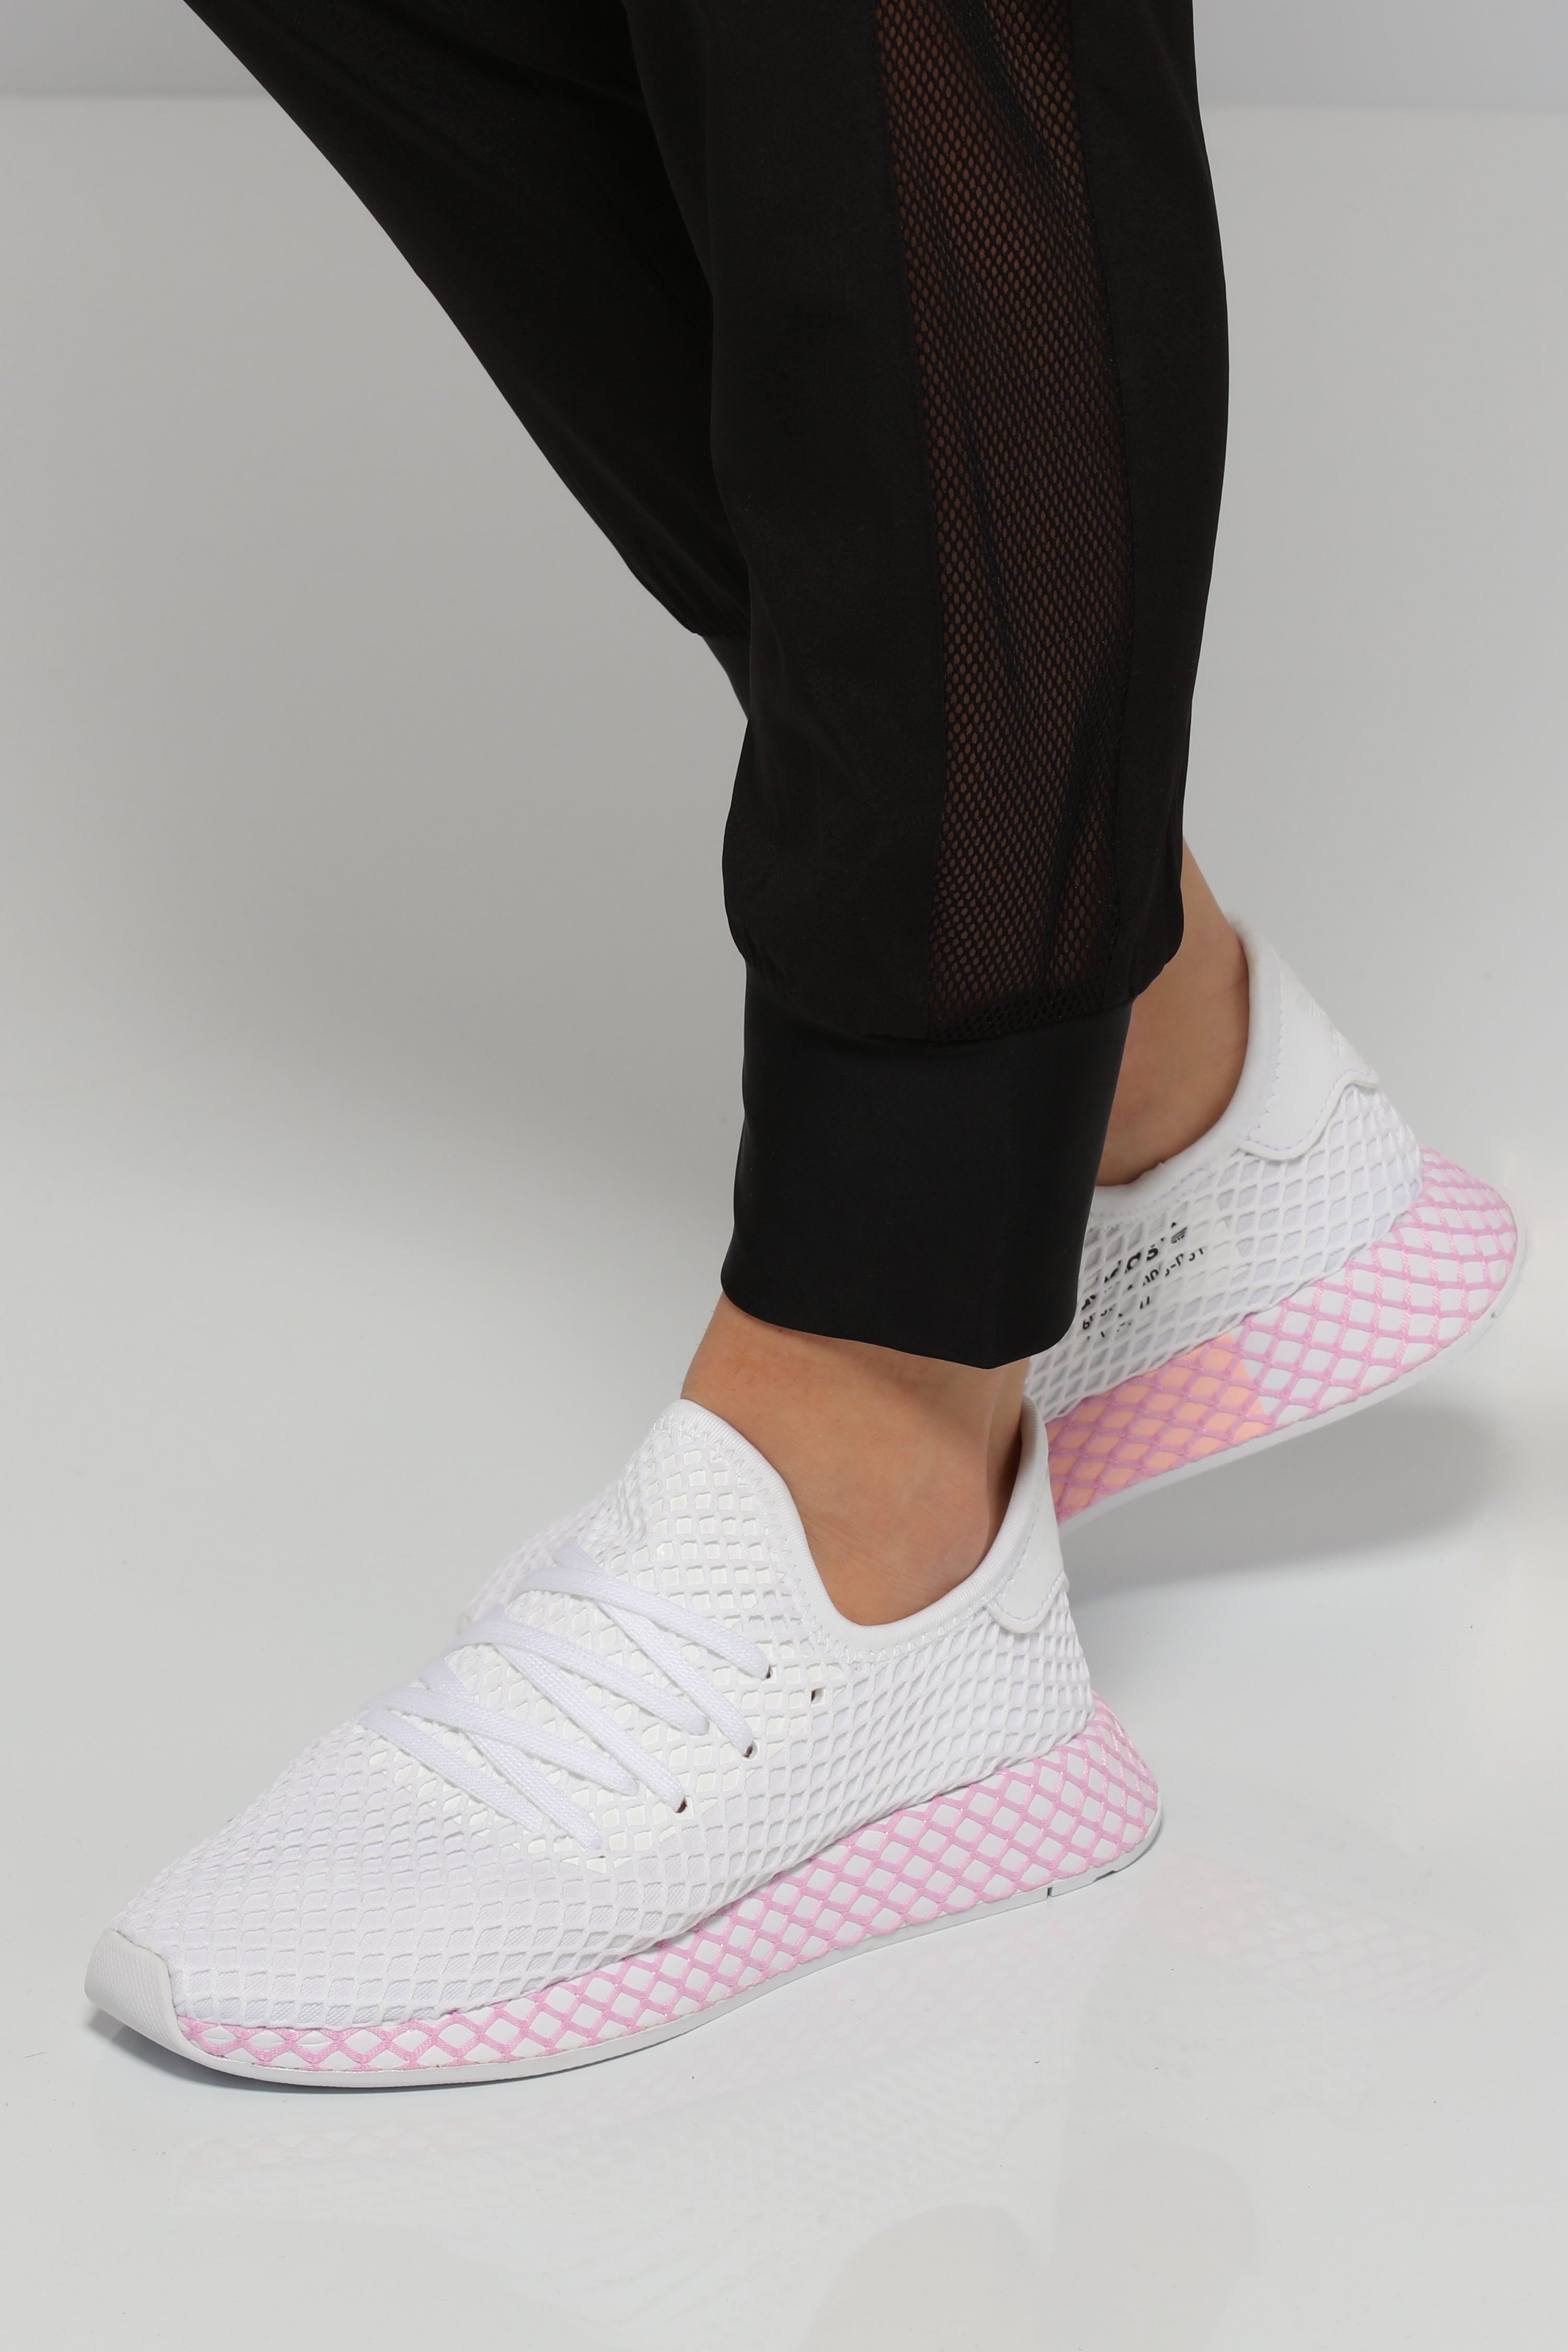 white and pink deerupt